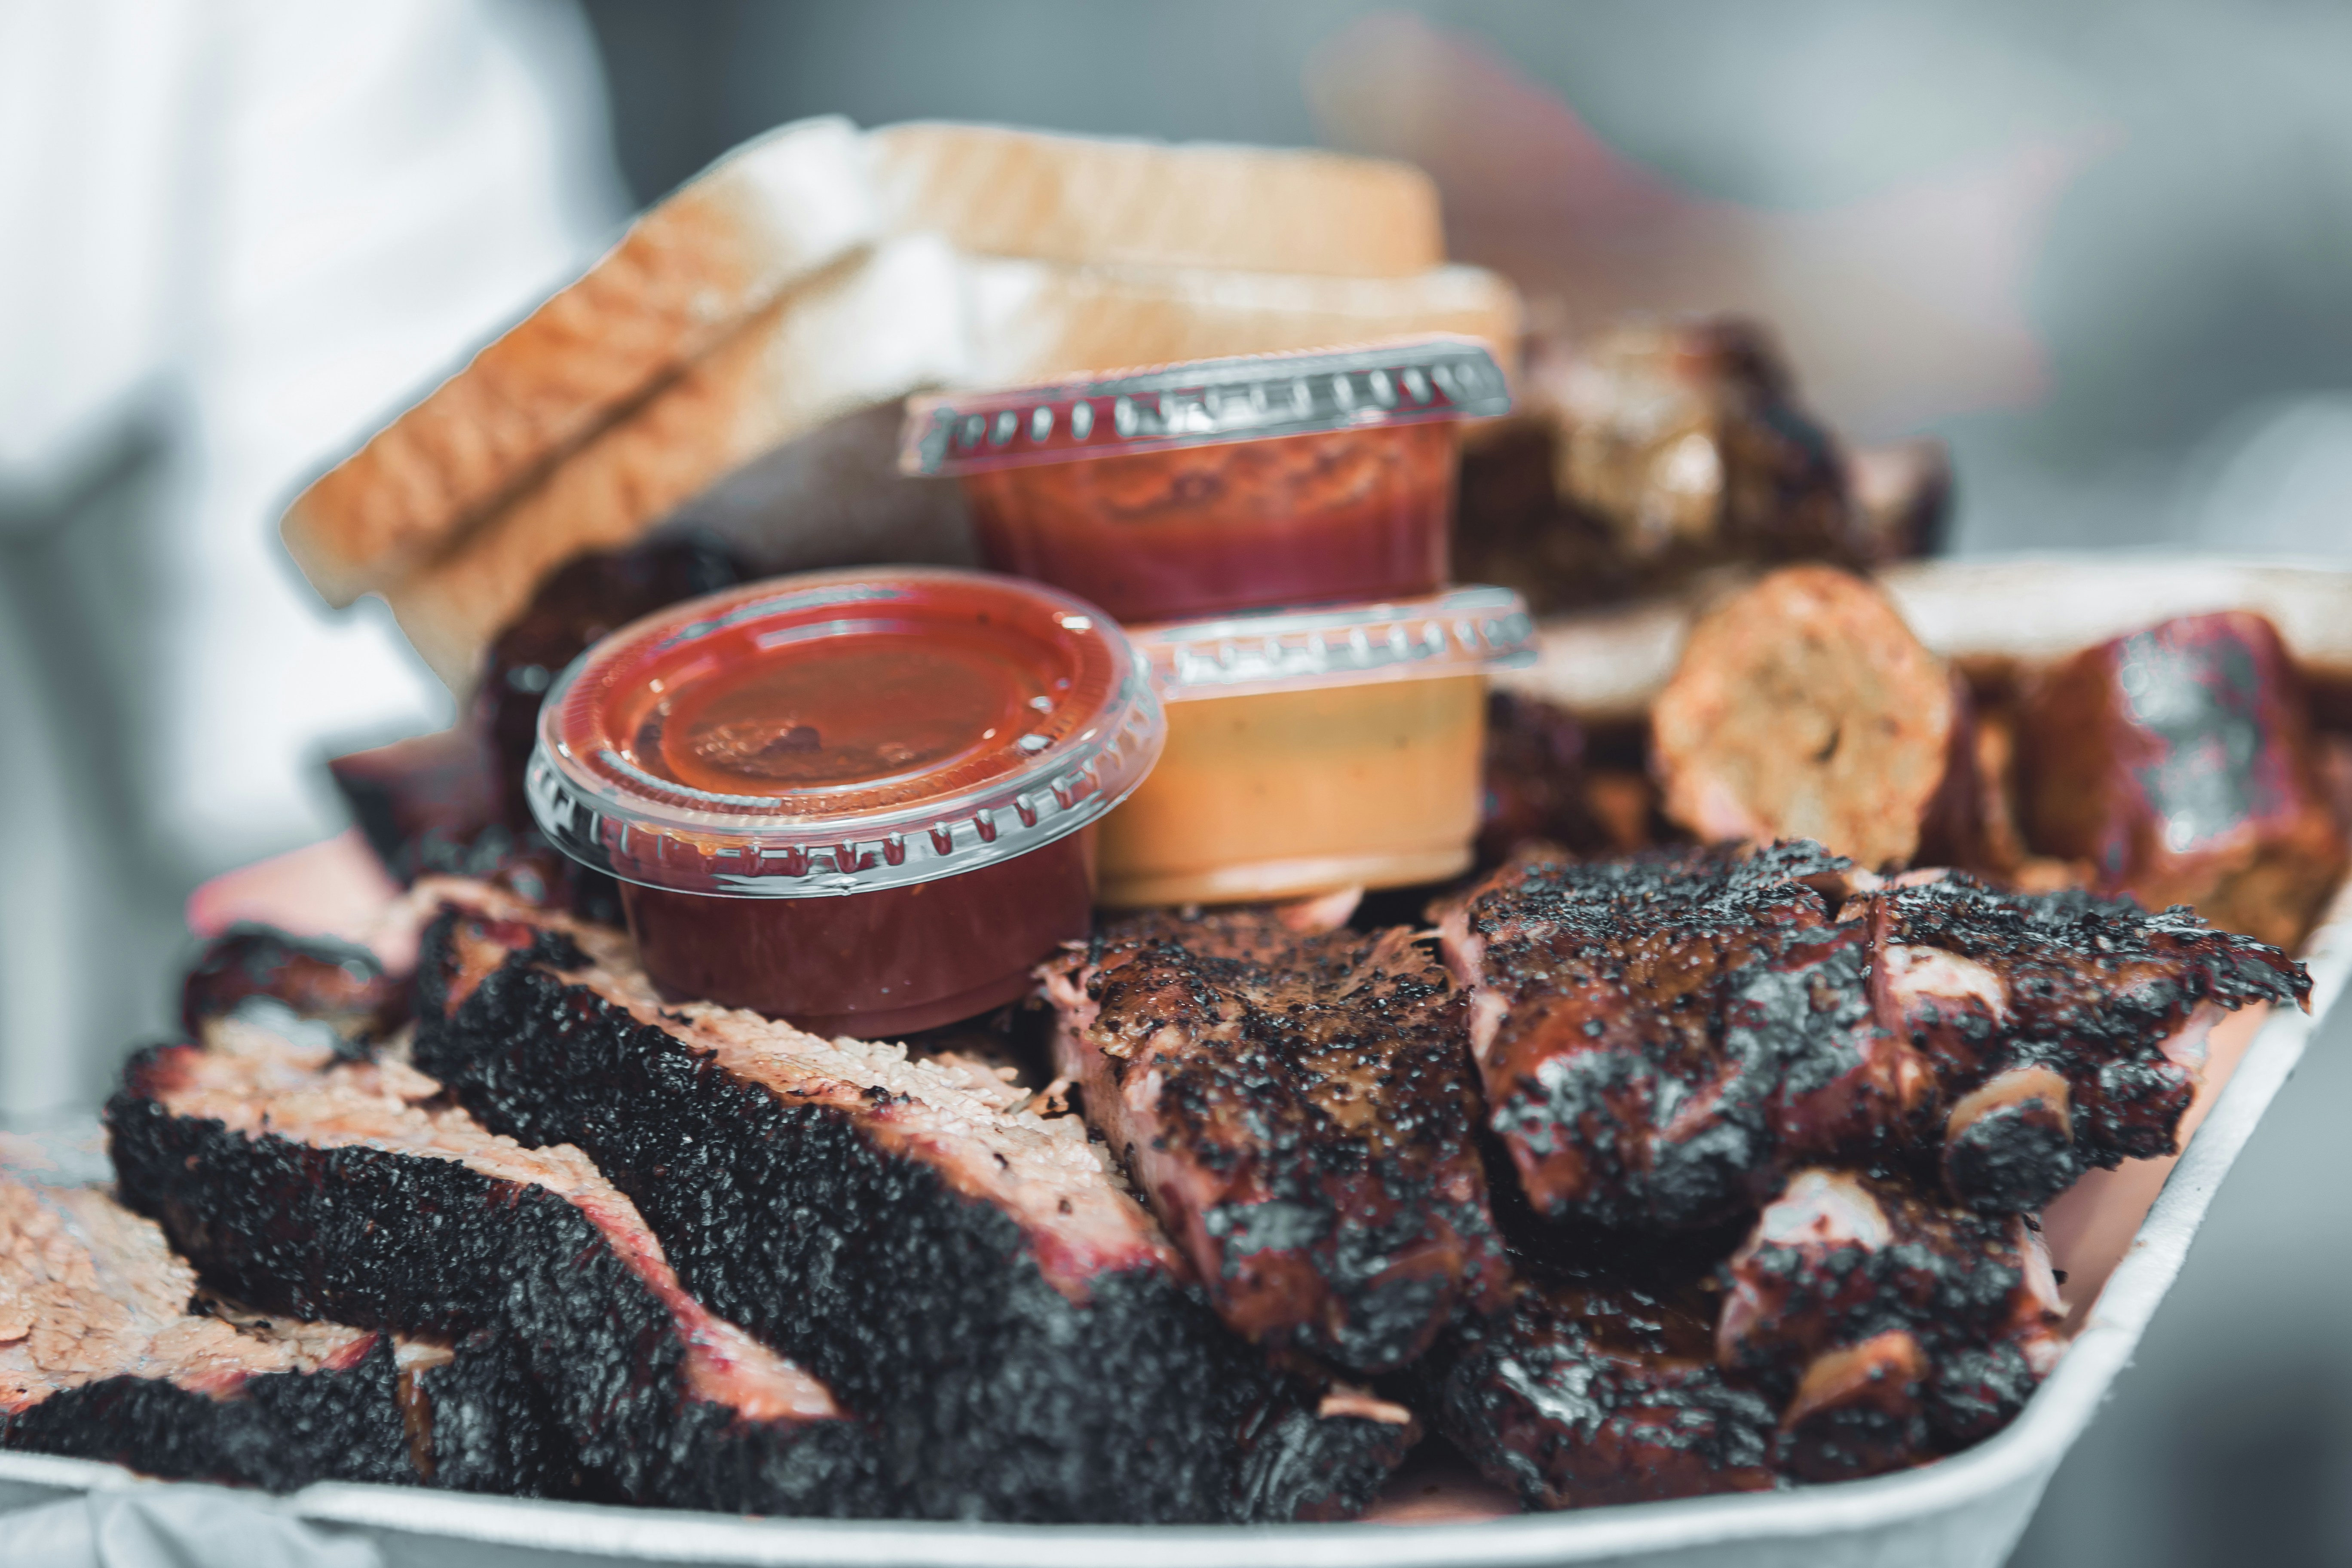 VIDEO: Barbecue Vocabulary Every Self-Respecting Southerner Should Know